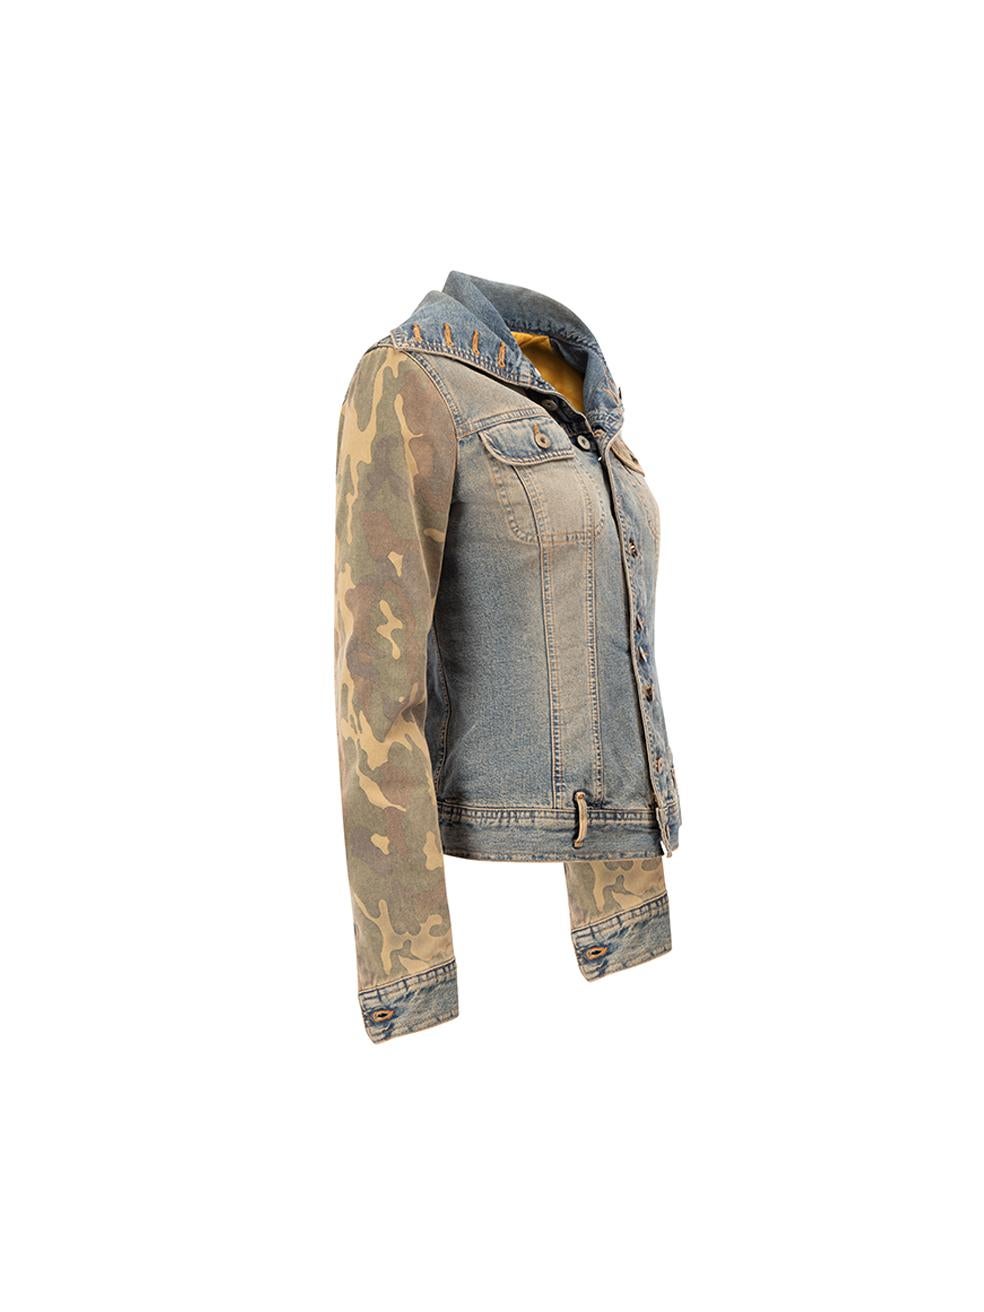 CONDITION is Very good. Minimal wear to jacket is evident. Minimal wear to overall exterior with light fading on this used D&G designer resale item. 



Details


Blue

Denim

Jacket

Contrast camouflage printed sleeves

Front button up